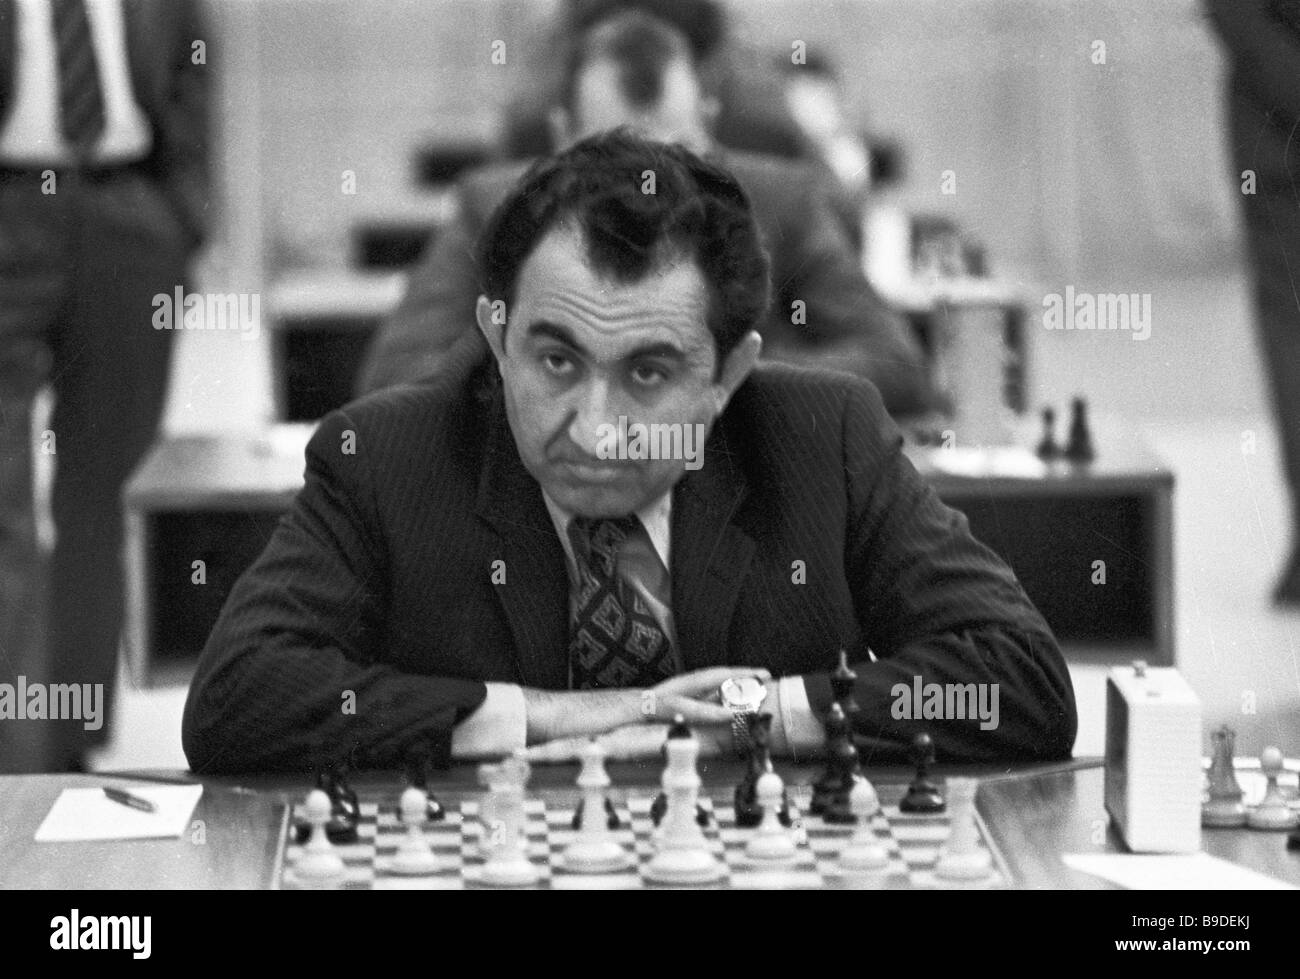 Tigran Petrosian Chess Products  The Life, Chess Games and Products of  World Champion Tigran Petrosian